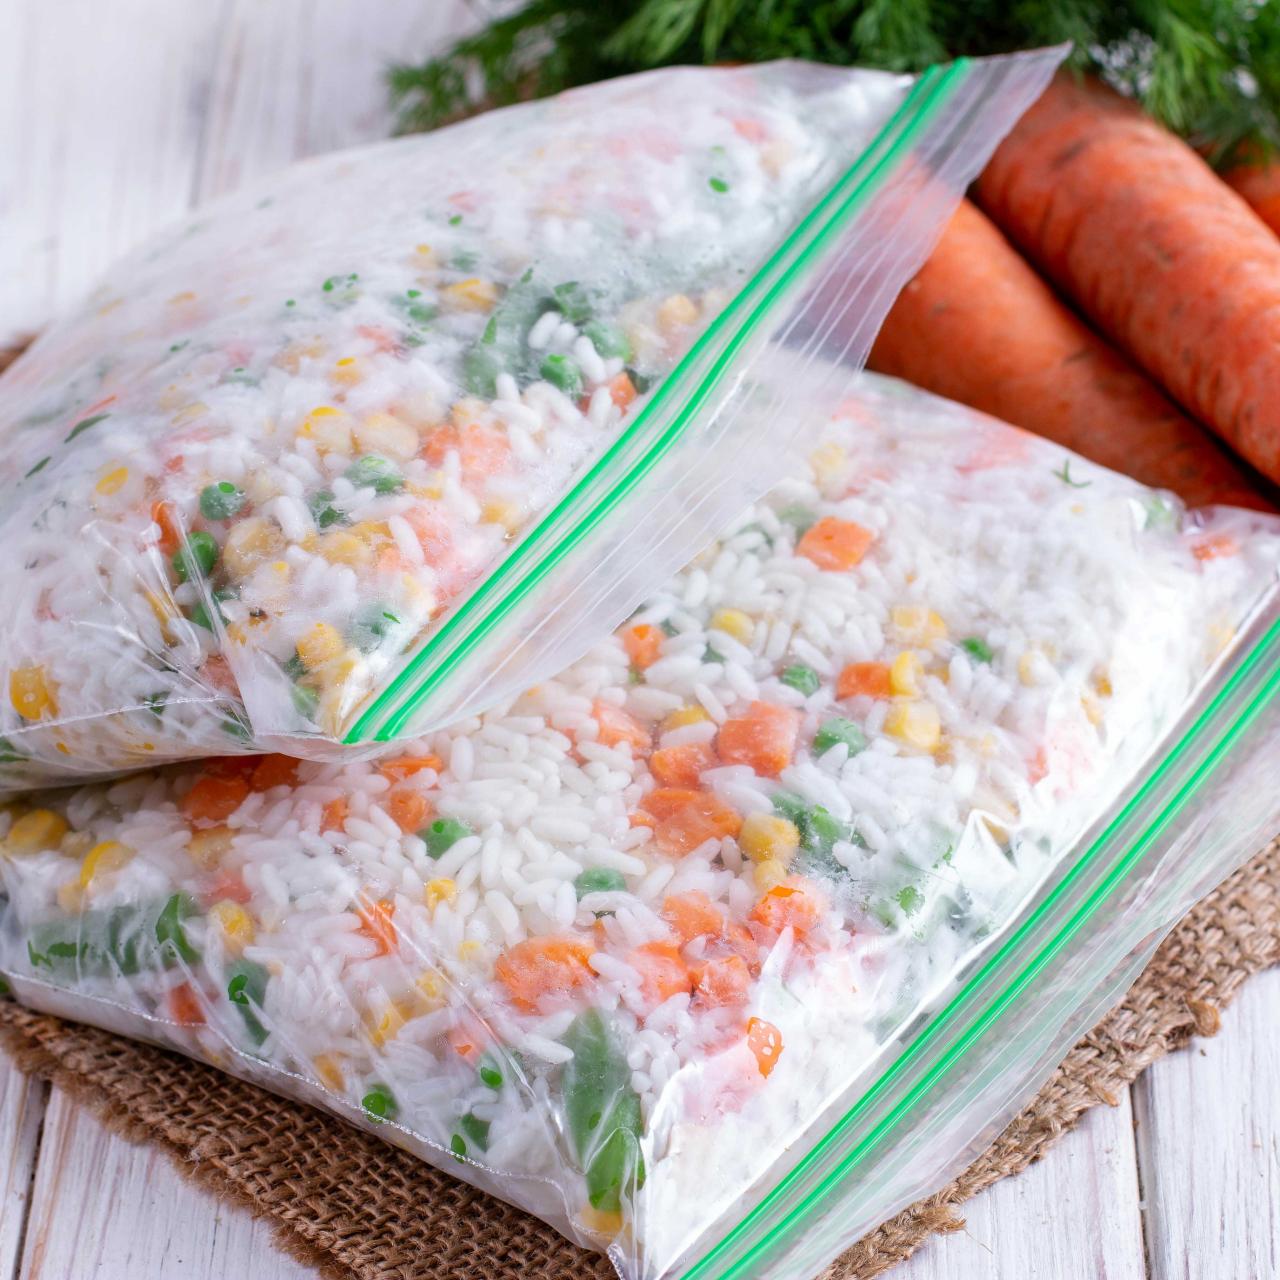 Foods You Should Never Put in the Freezer - Worst Foods To Freeze